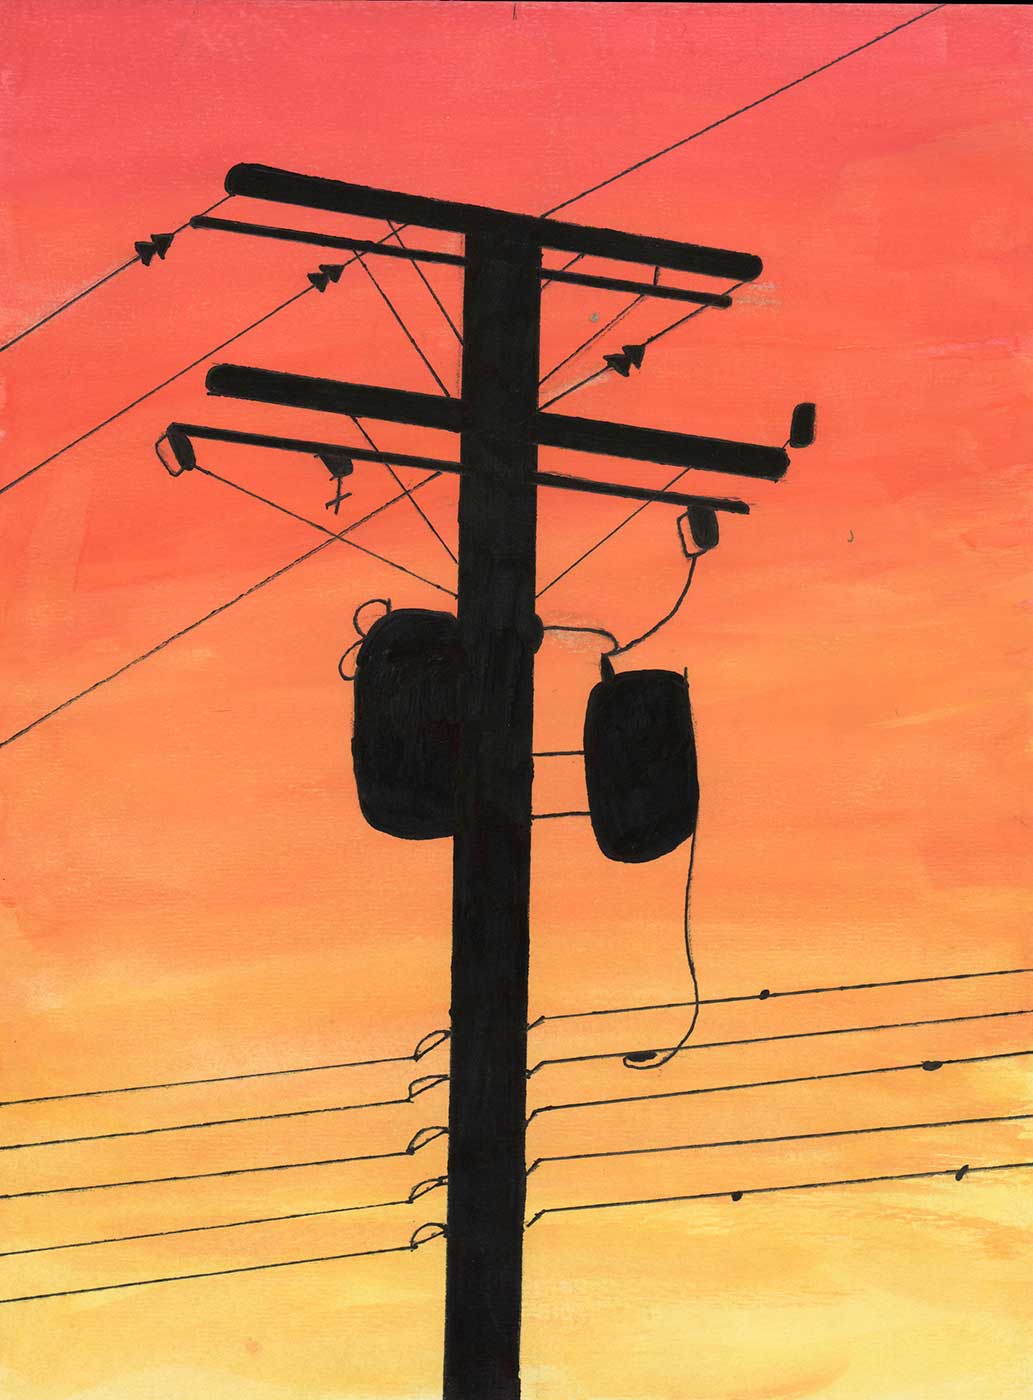 drawing of a transformer pole silhouette in front of the sunset.